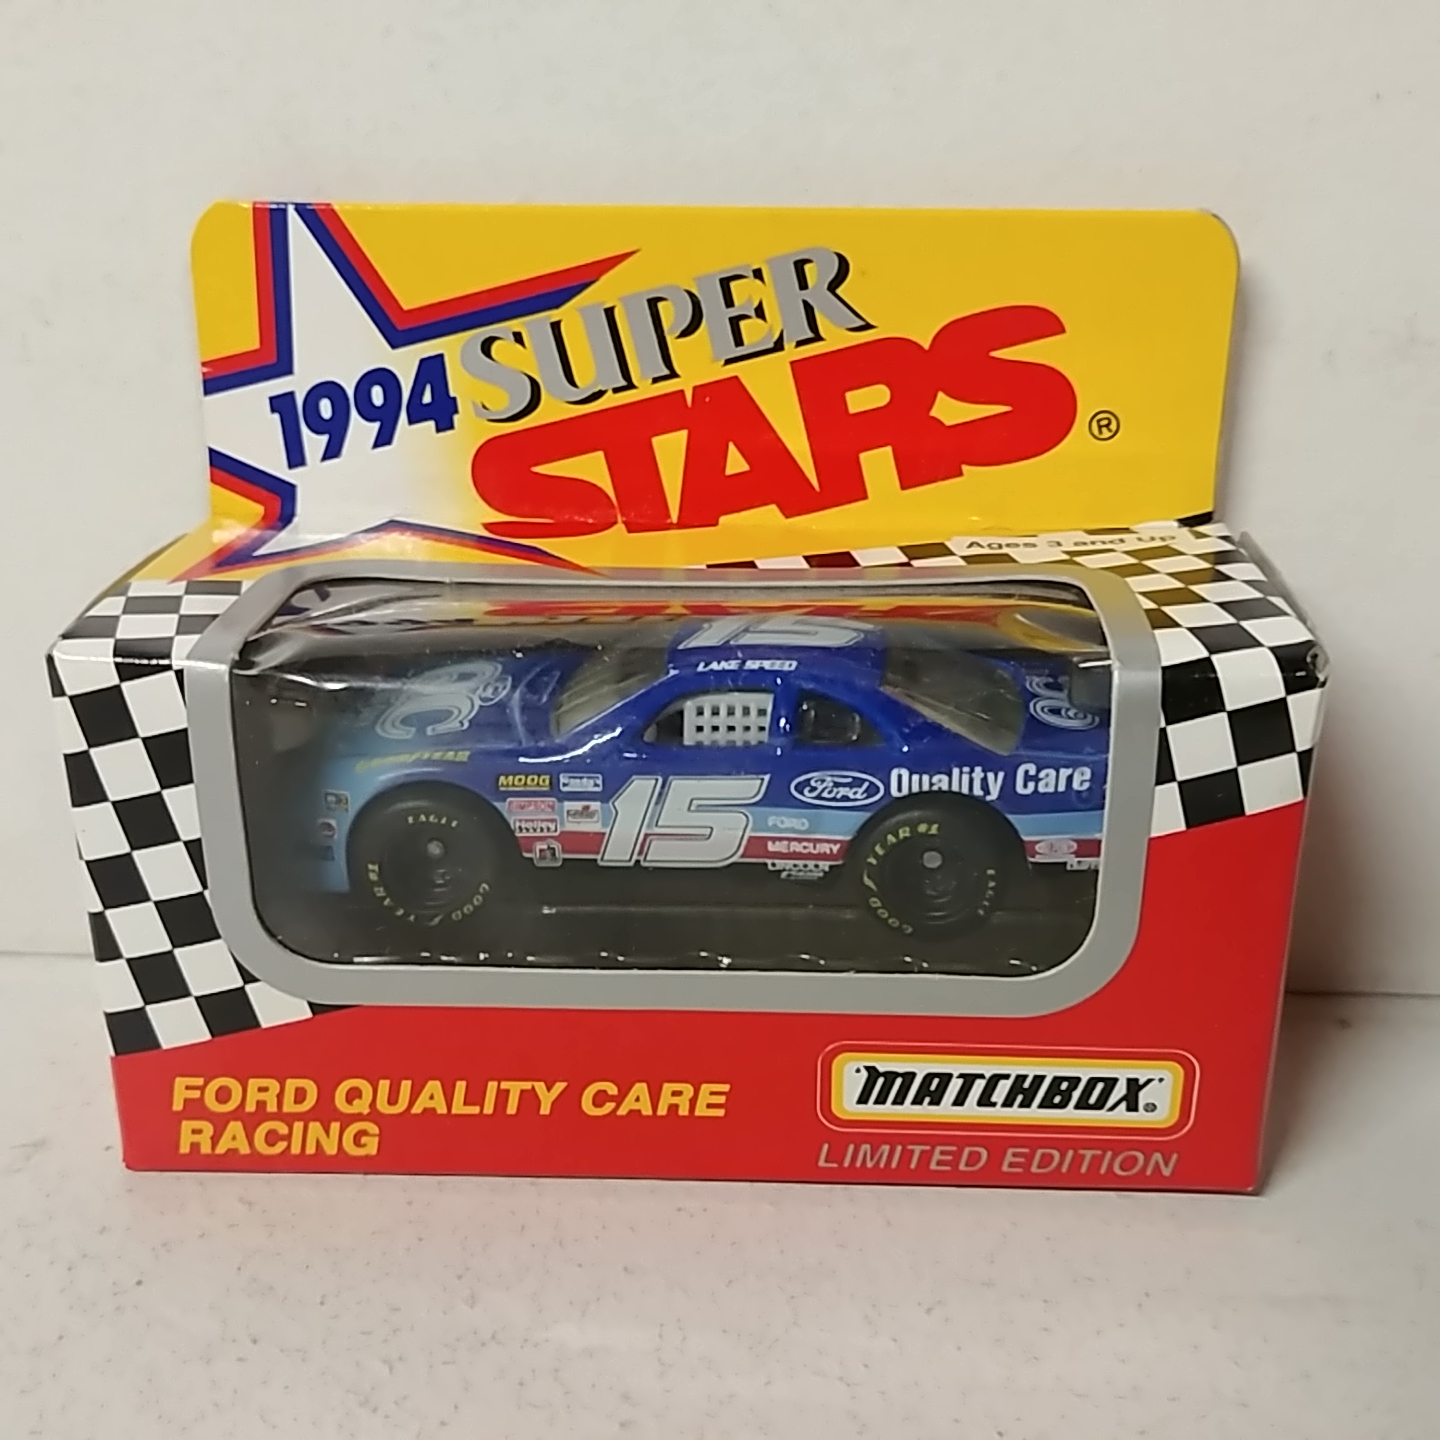 1994 Lake Speed 1/64th Quality Care car